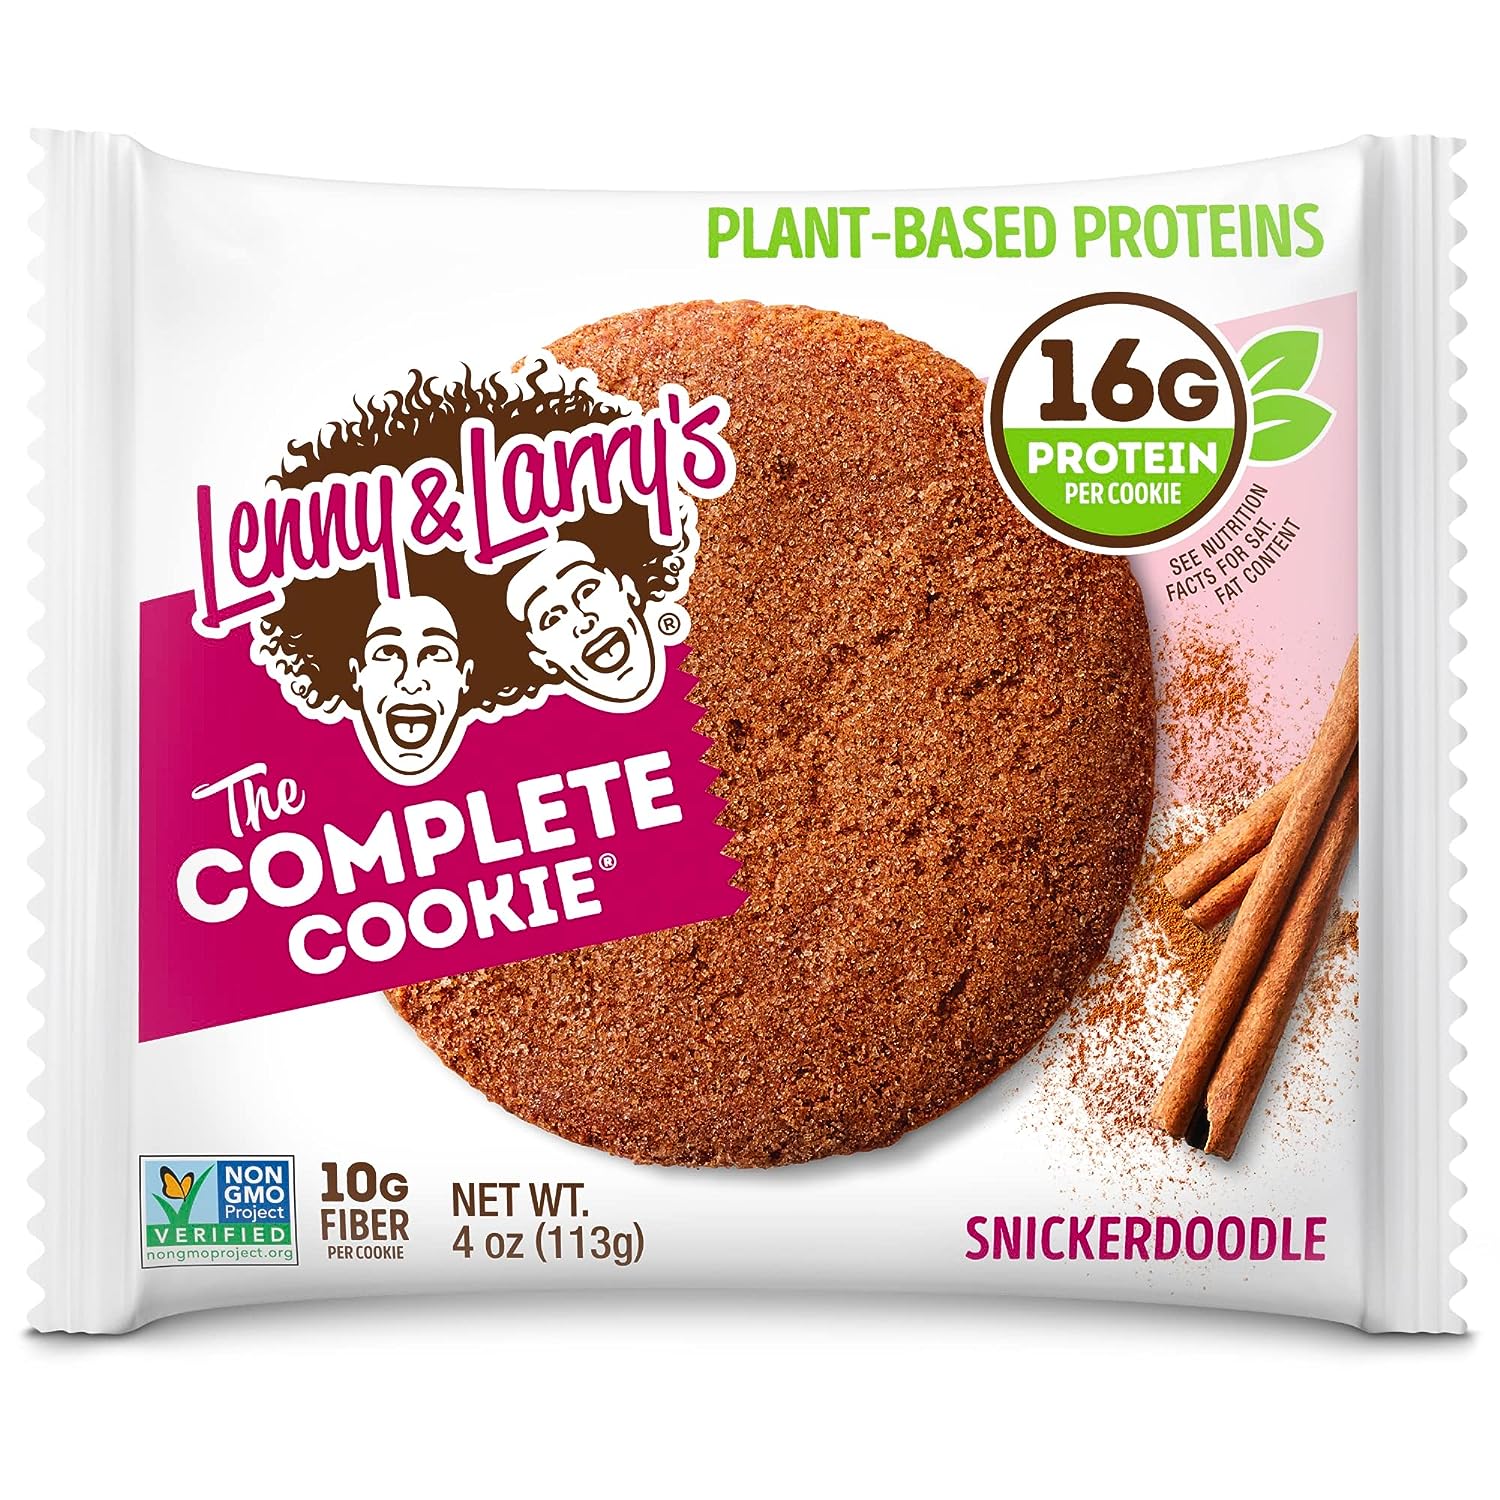 Lenny & Larry's The Complete Cookie, Snickerdoodle, Soft Baked, 16g Plant Protein, Vegan, Non-GMO, 113g